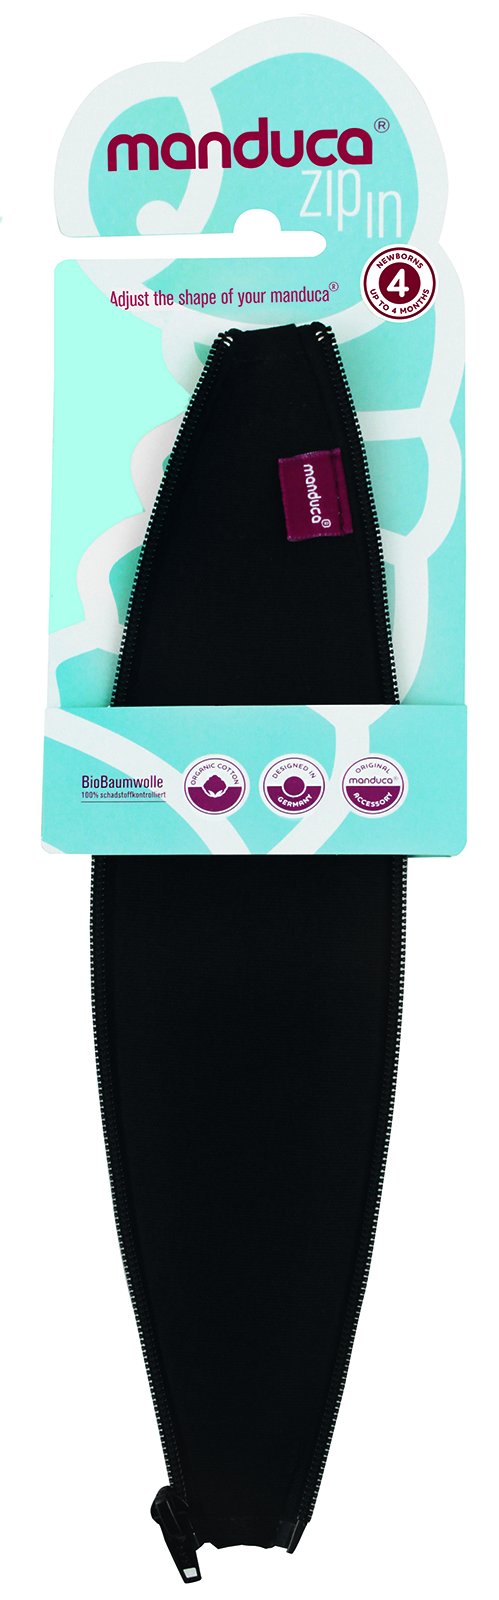 [Australia] - manduca Zip-in Inserts | for Even More Individuality and Comfort | Suitable for All manduca Baby Slings/Carriers ZipIn Ellipse Black 